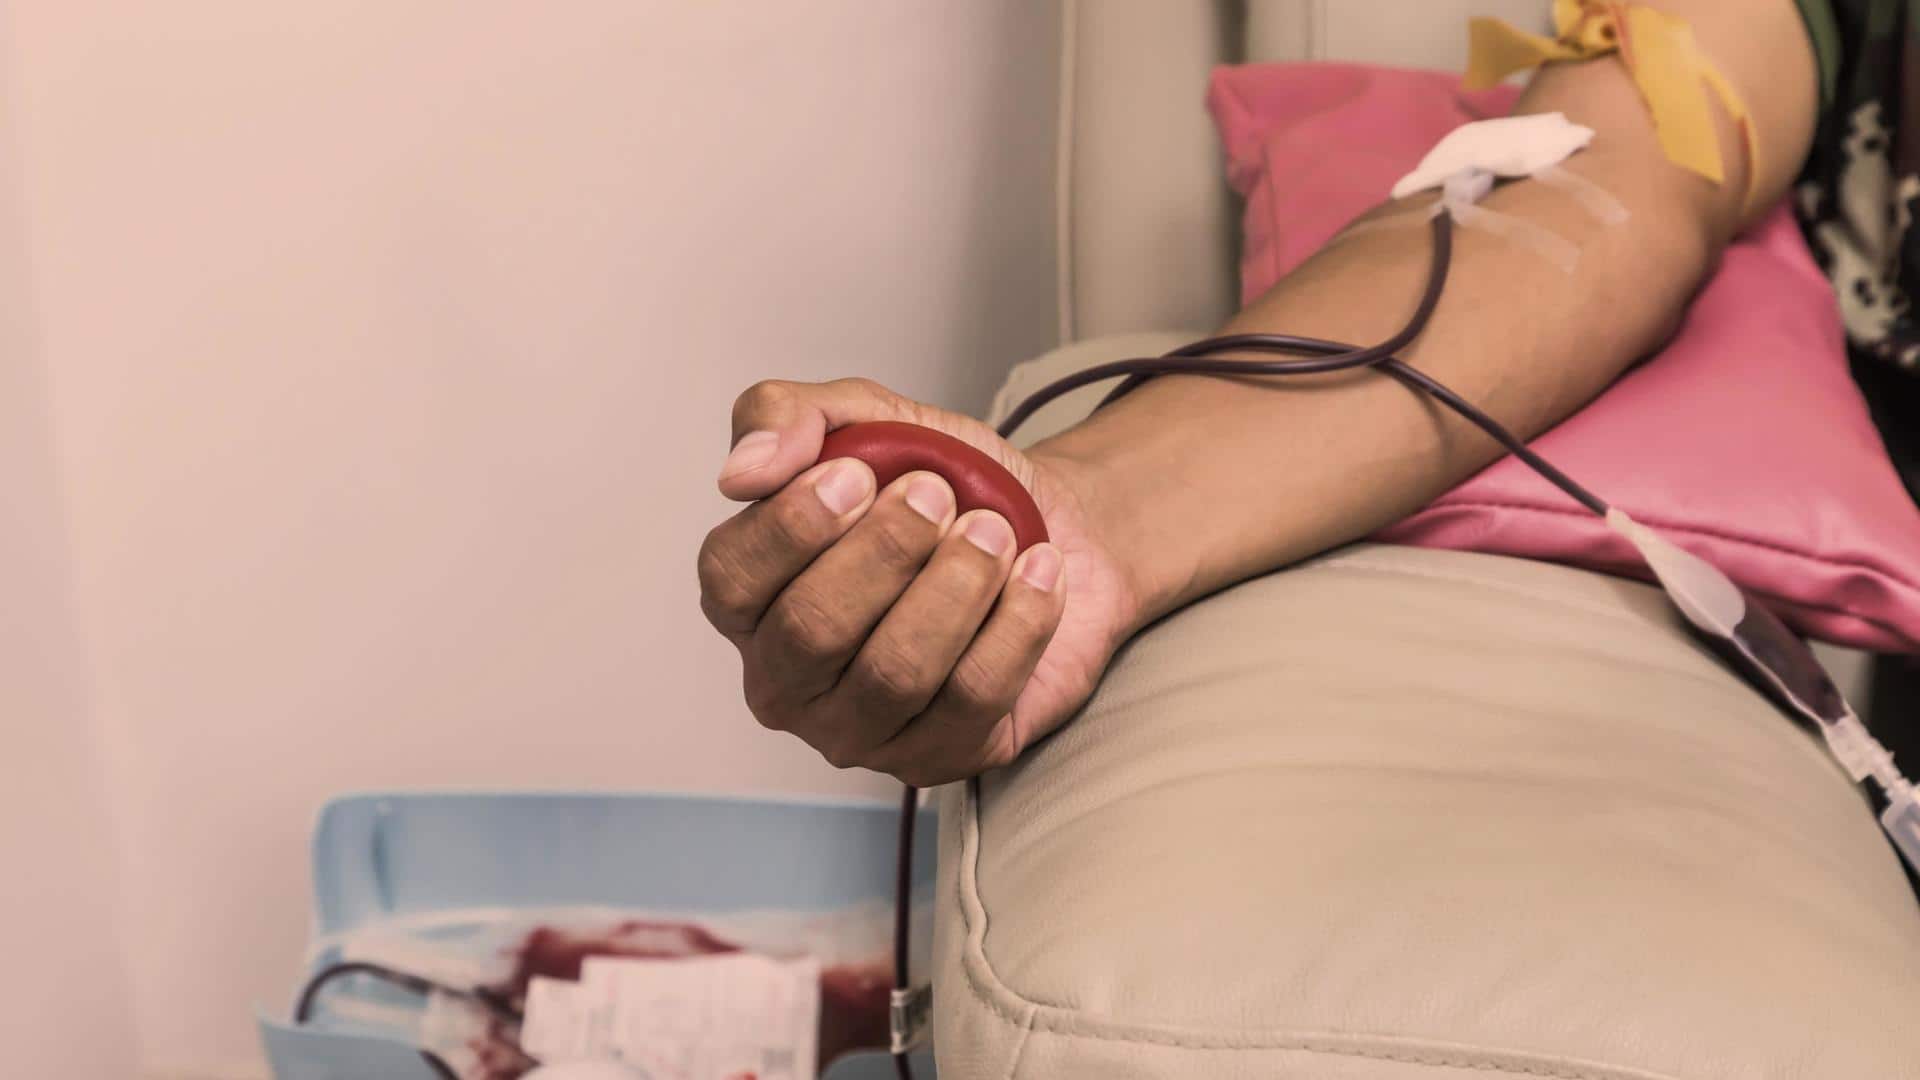 These blood donation myths are absolutely baseless